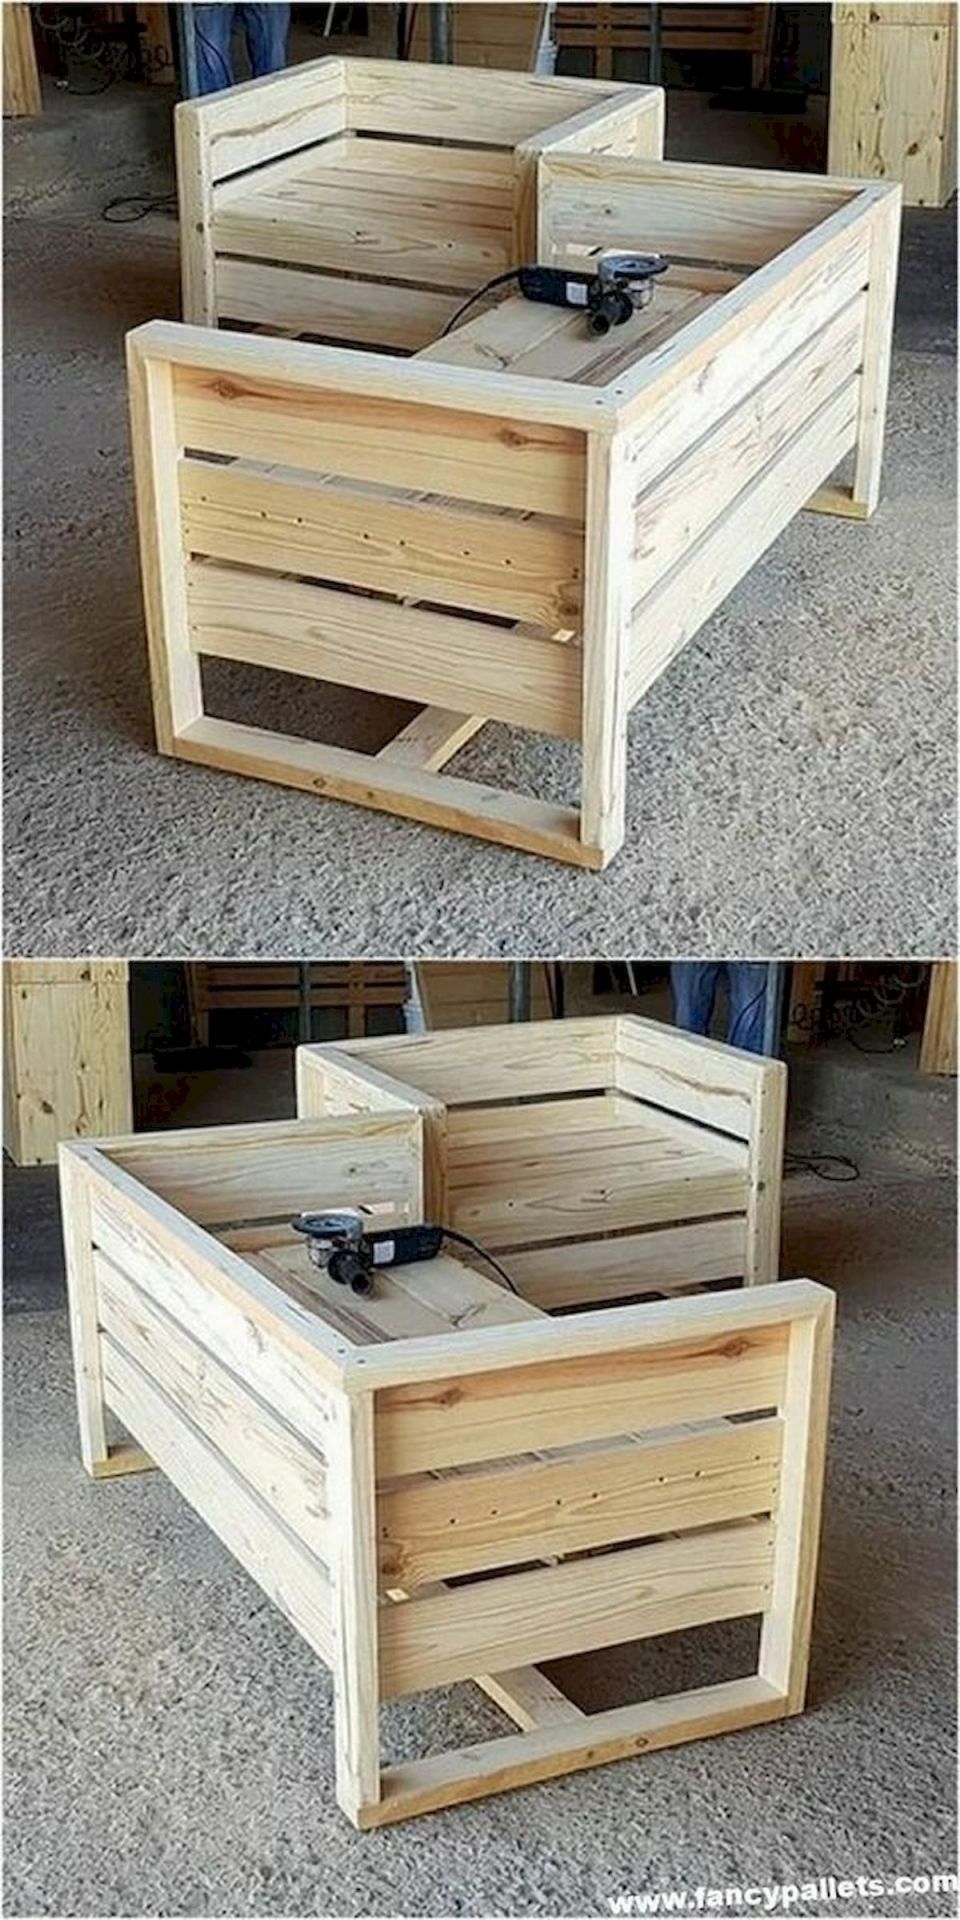  Best diy wood furniture projects 